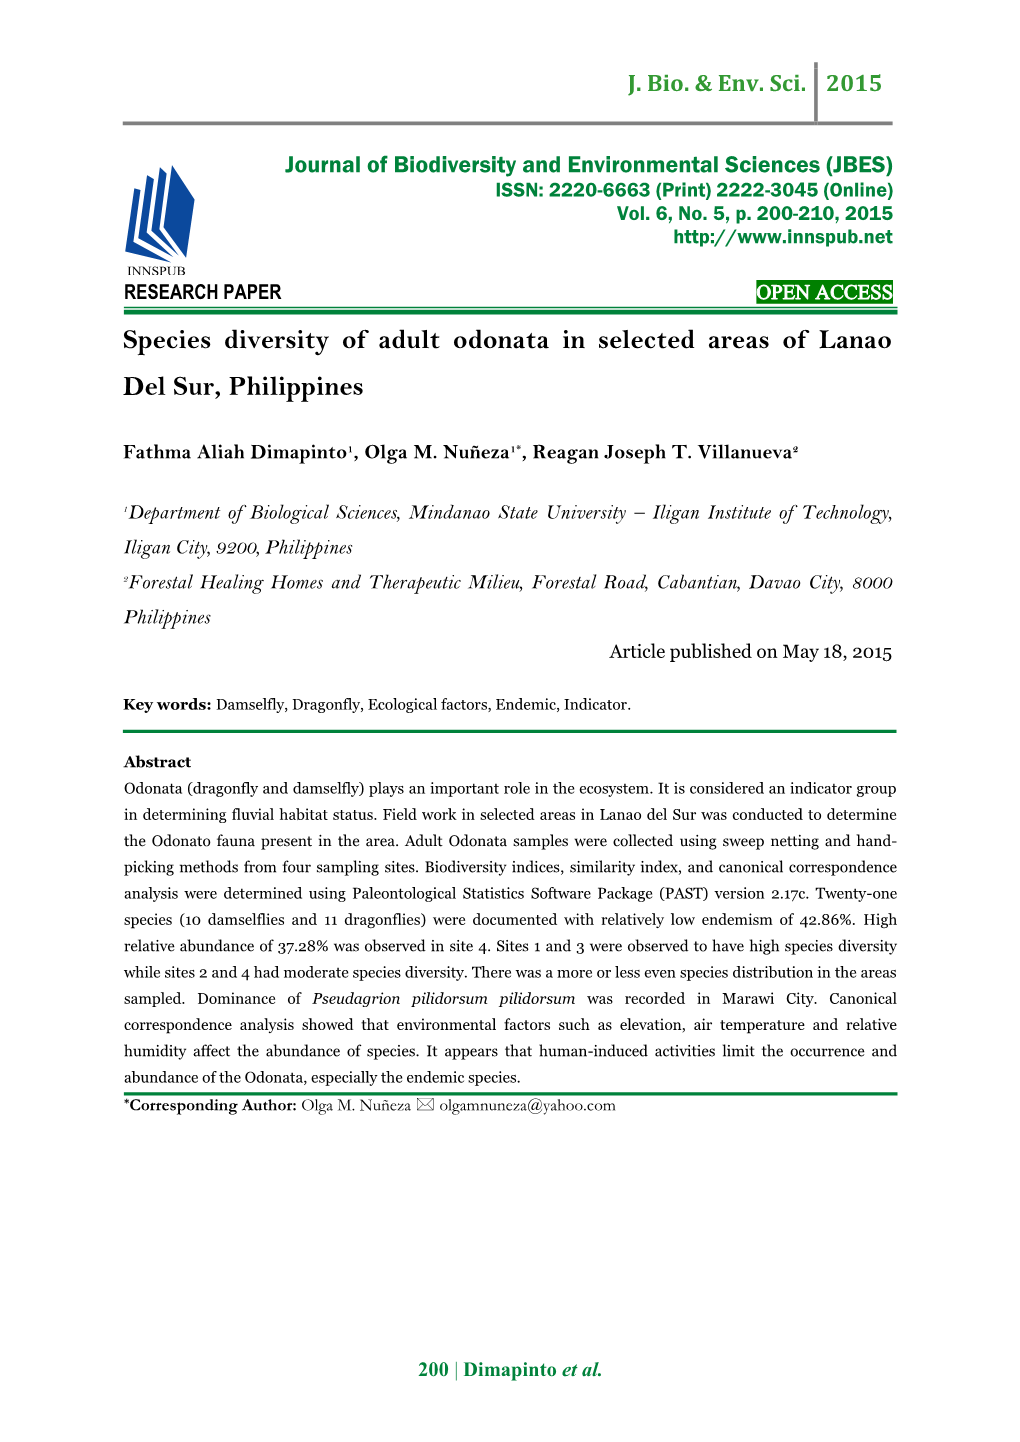 Species Diversity of Adult Odonata in Selected Areas of Lanao Del Sur, Philippines